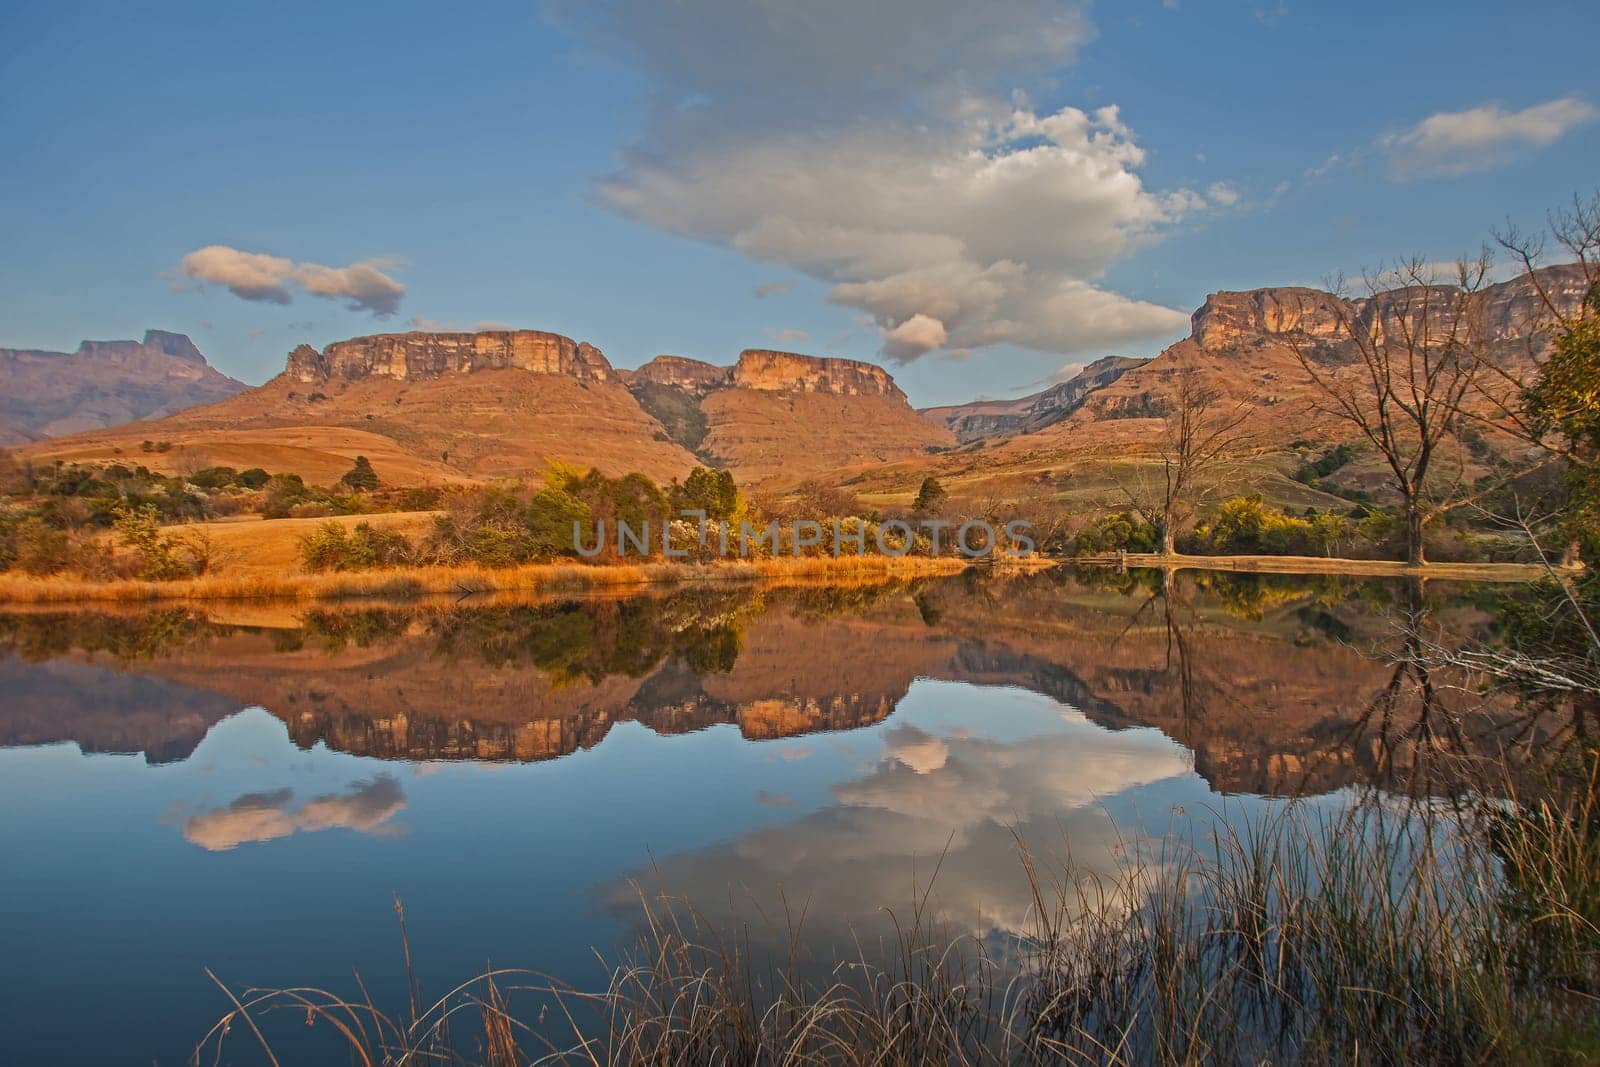 Scenic reflections in a Drakensberg lake 15546 by kobus_peche